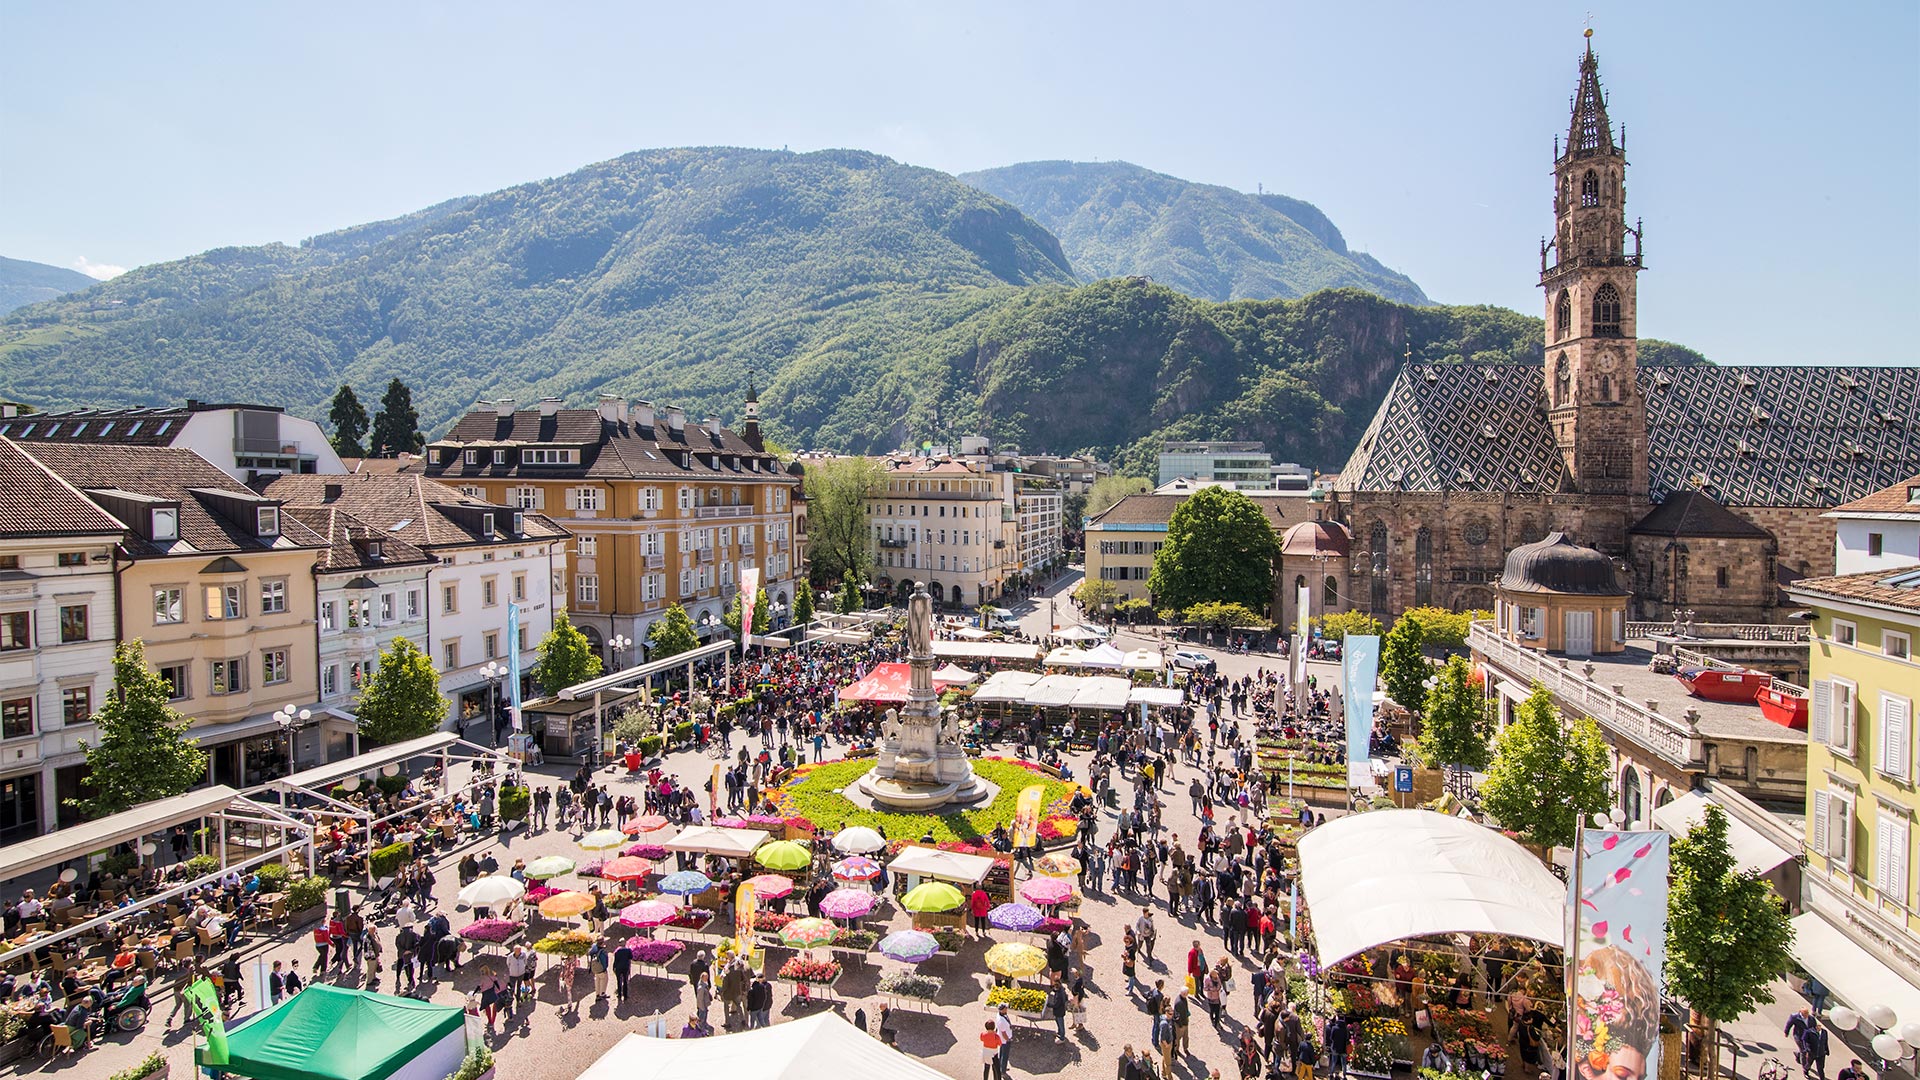 View from above of Piazza Walther, decorated with benches and umbrellas on a hot summer's day.